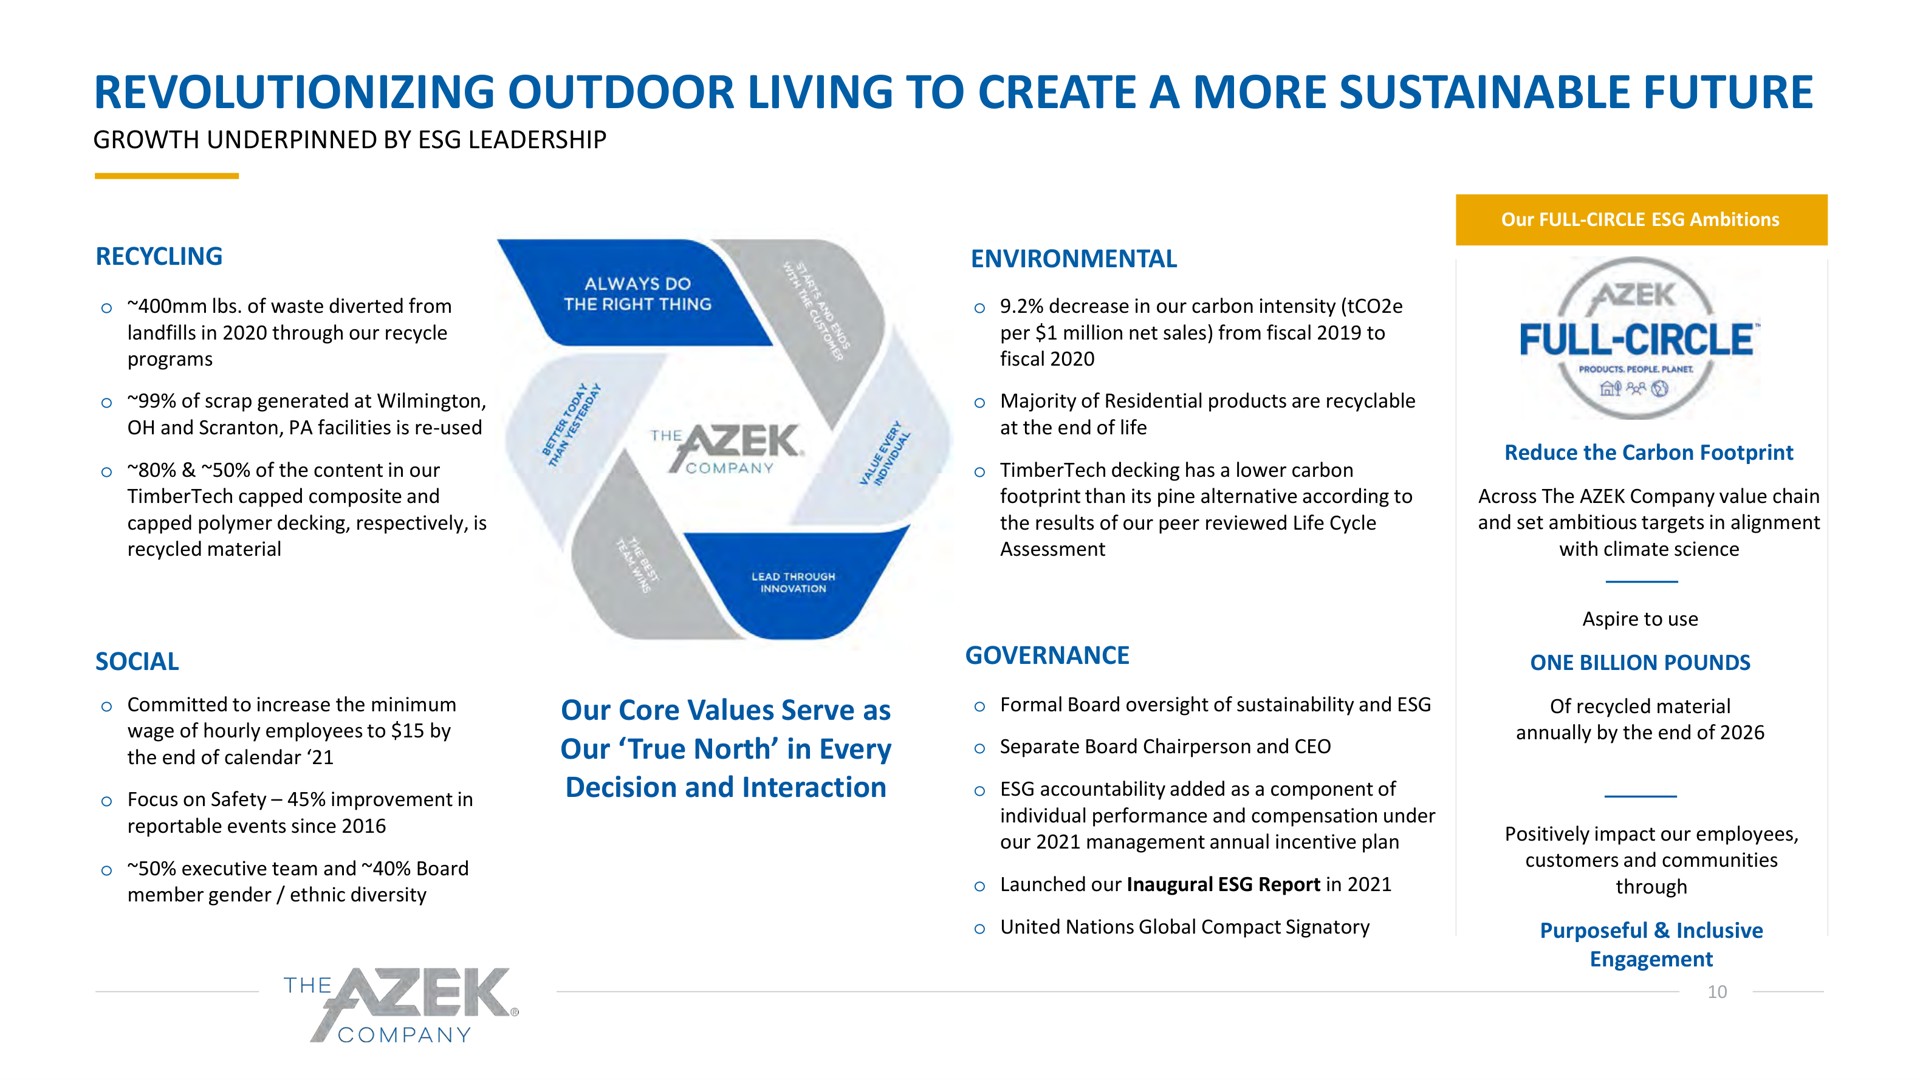 revolutionizing outdoor living to create a more sustainable future full circle | Azek